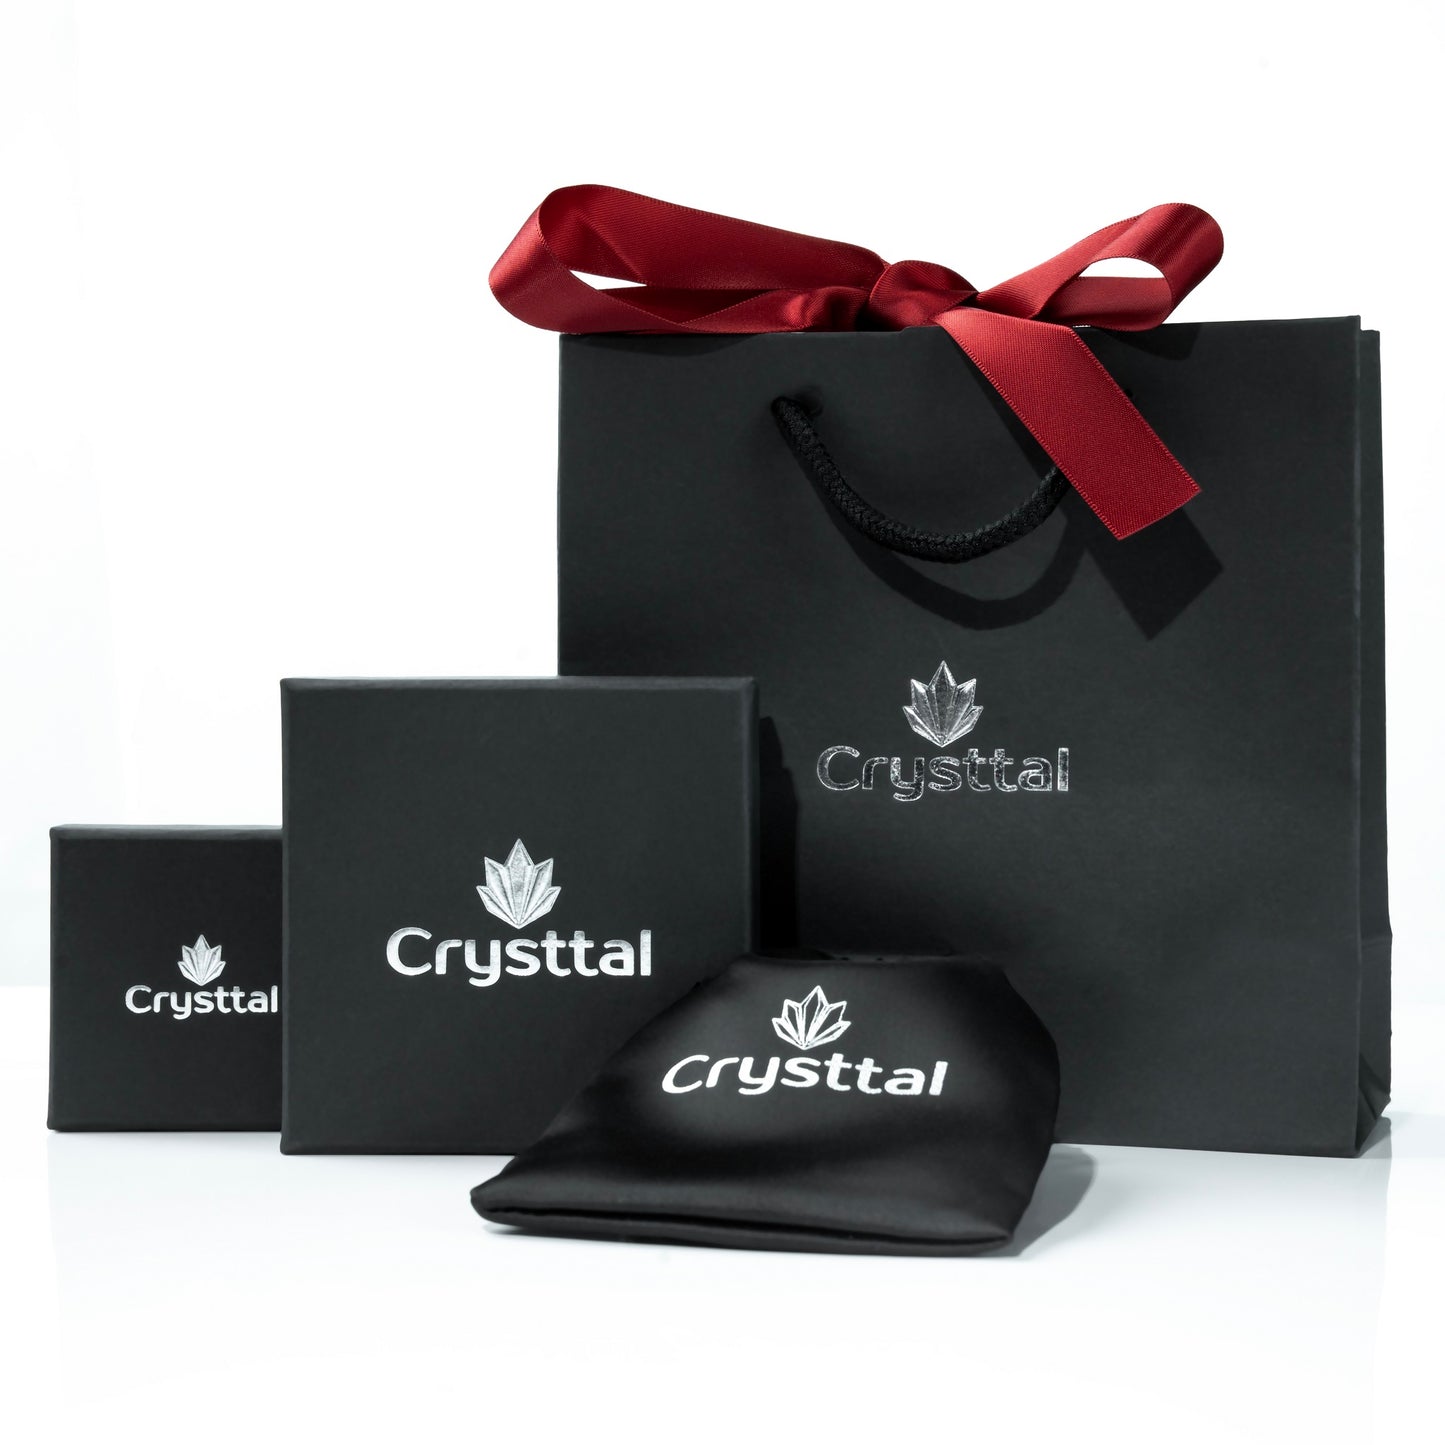 Our Crysttal branded gift packaging including Ring box, Necklace box, storage pouch and Gift bag with bow ribbon